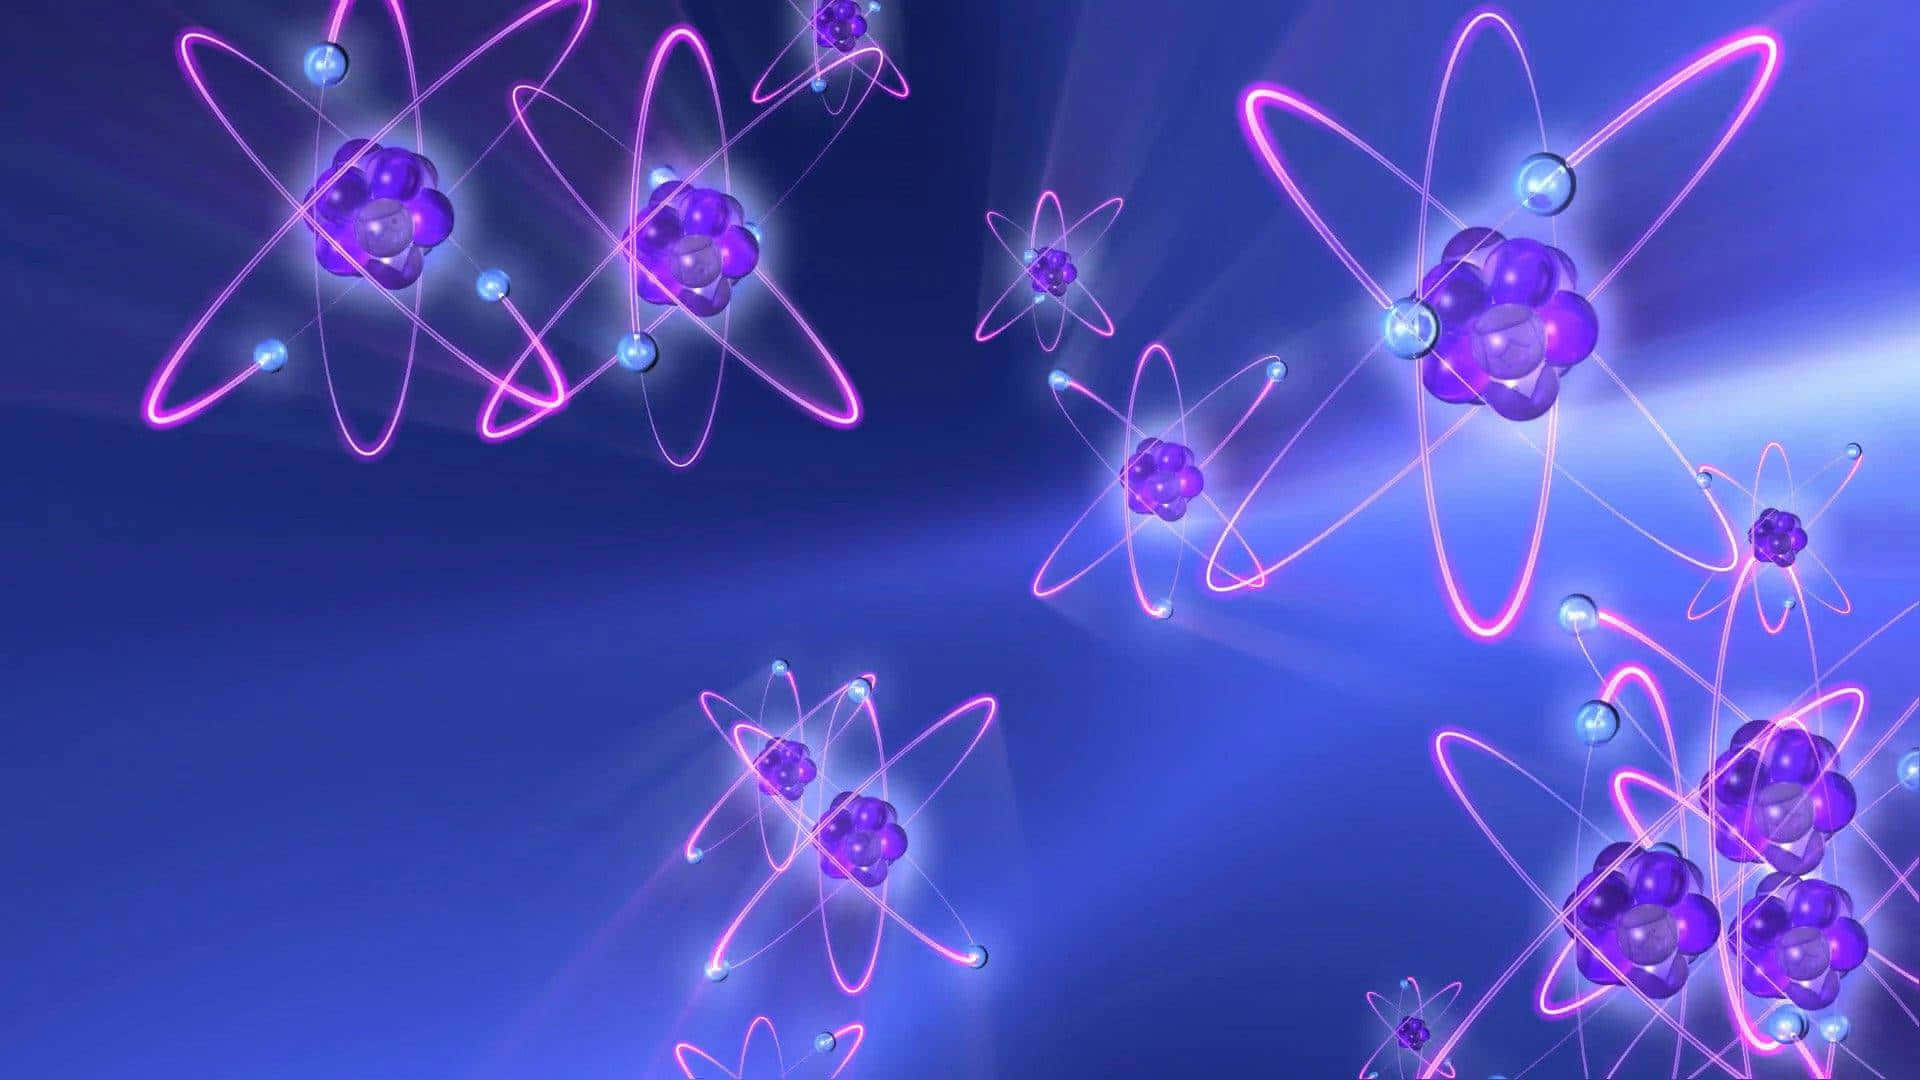 Atomic_ Structures_in_ Blue_ Hues Wallpaper